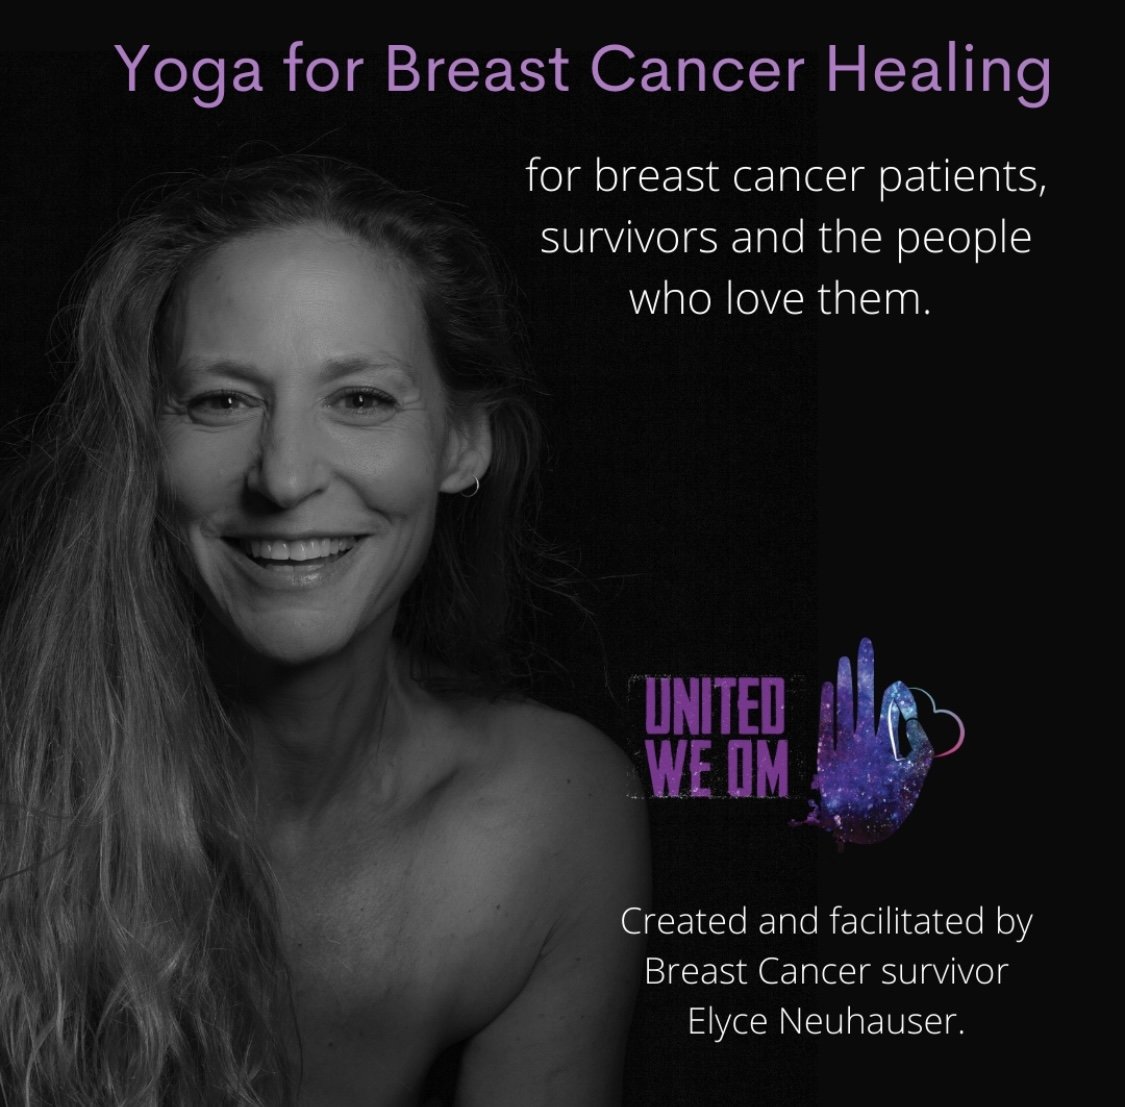 Breast Cancer and Wellness: Yoga - OWise UK